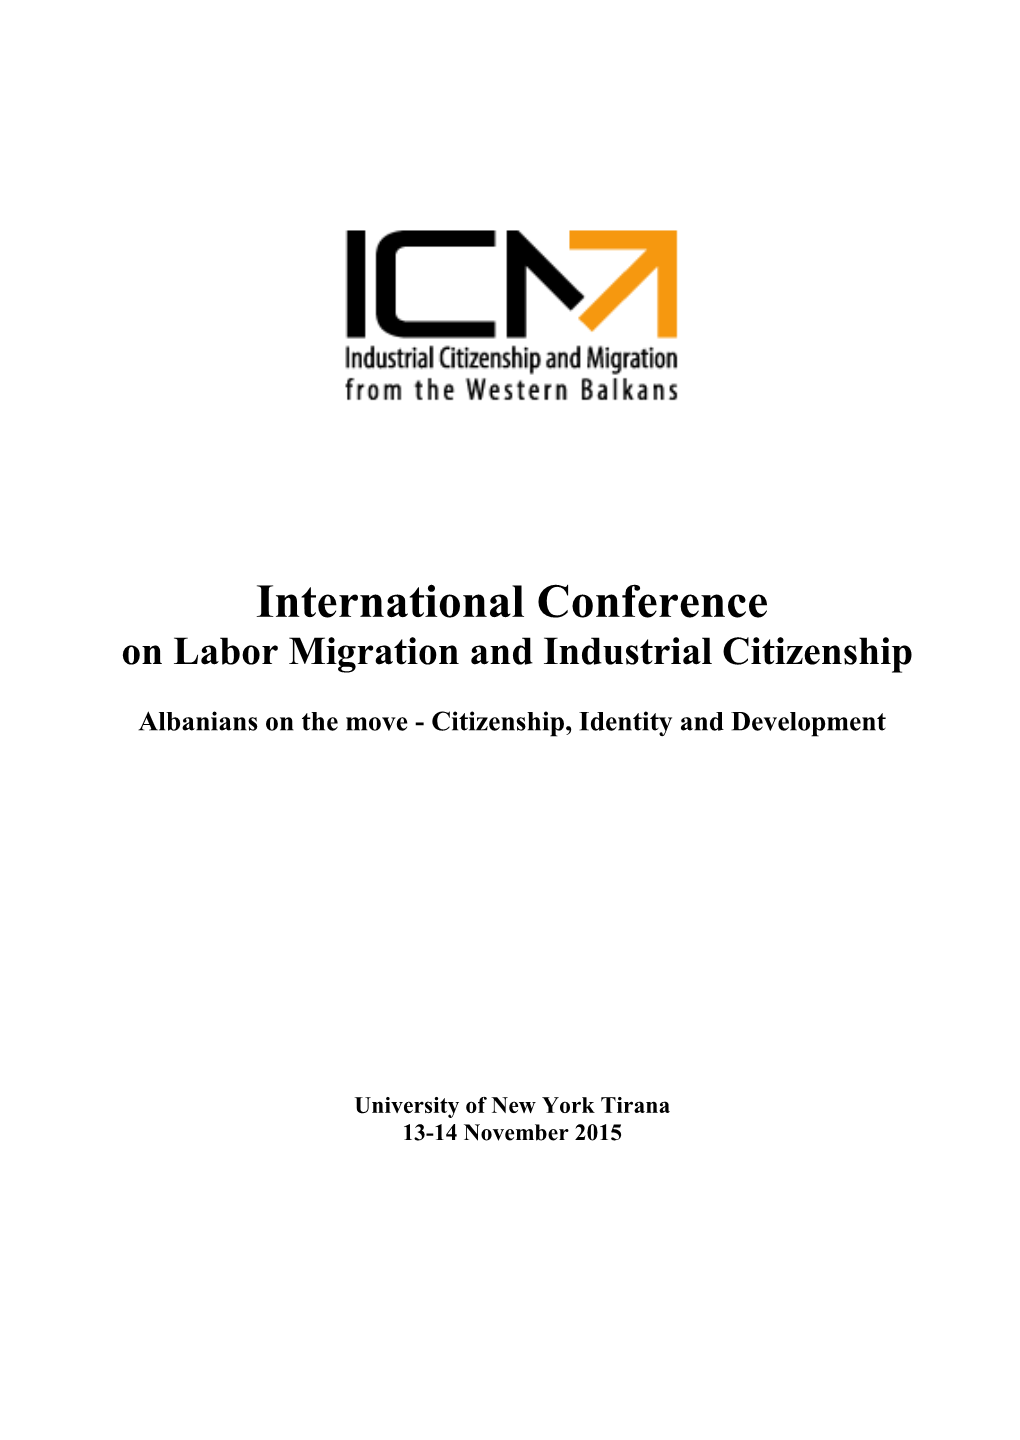 International Conference on Labor Migration and Industrial Citizenship